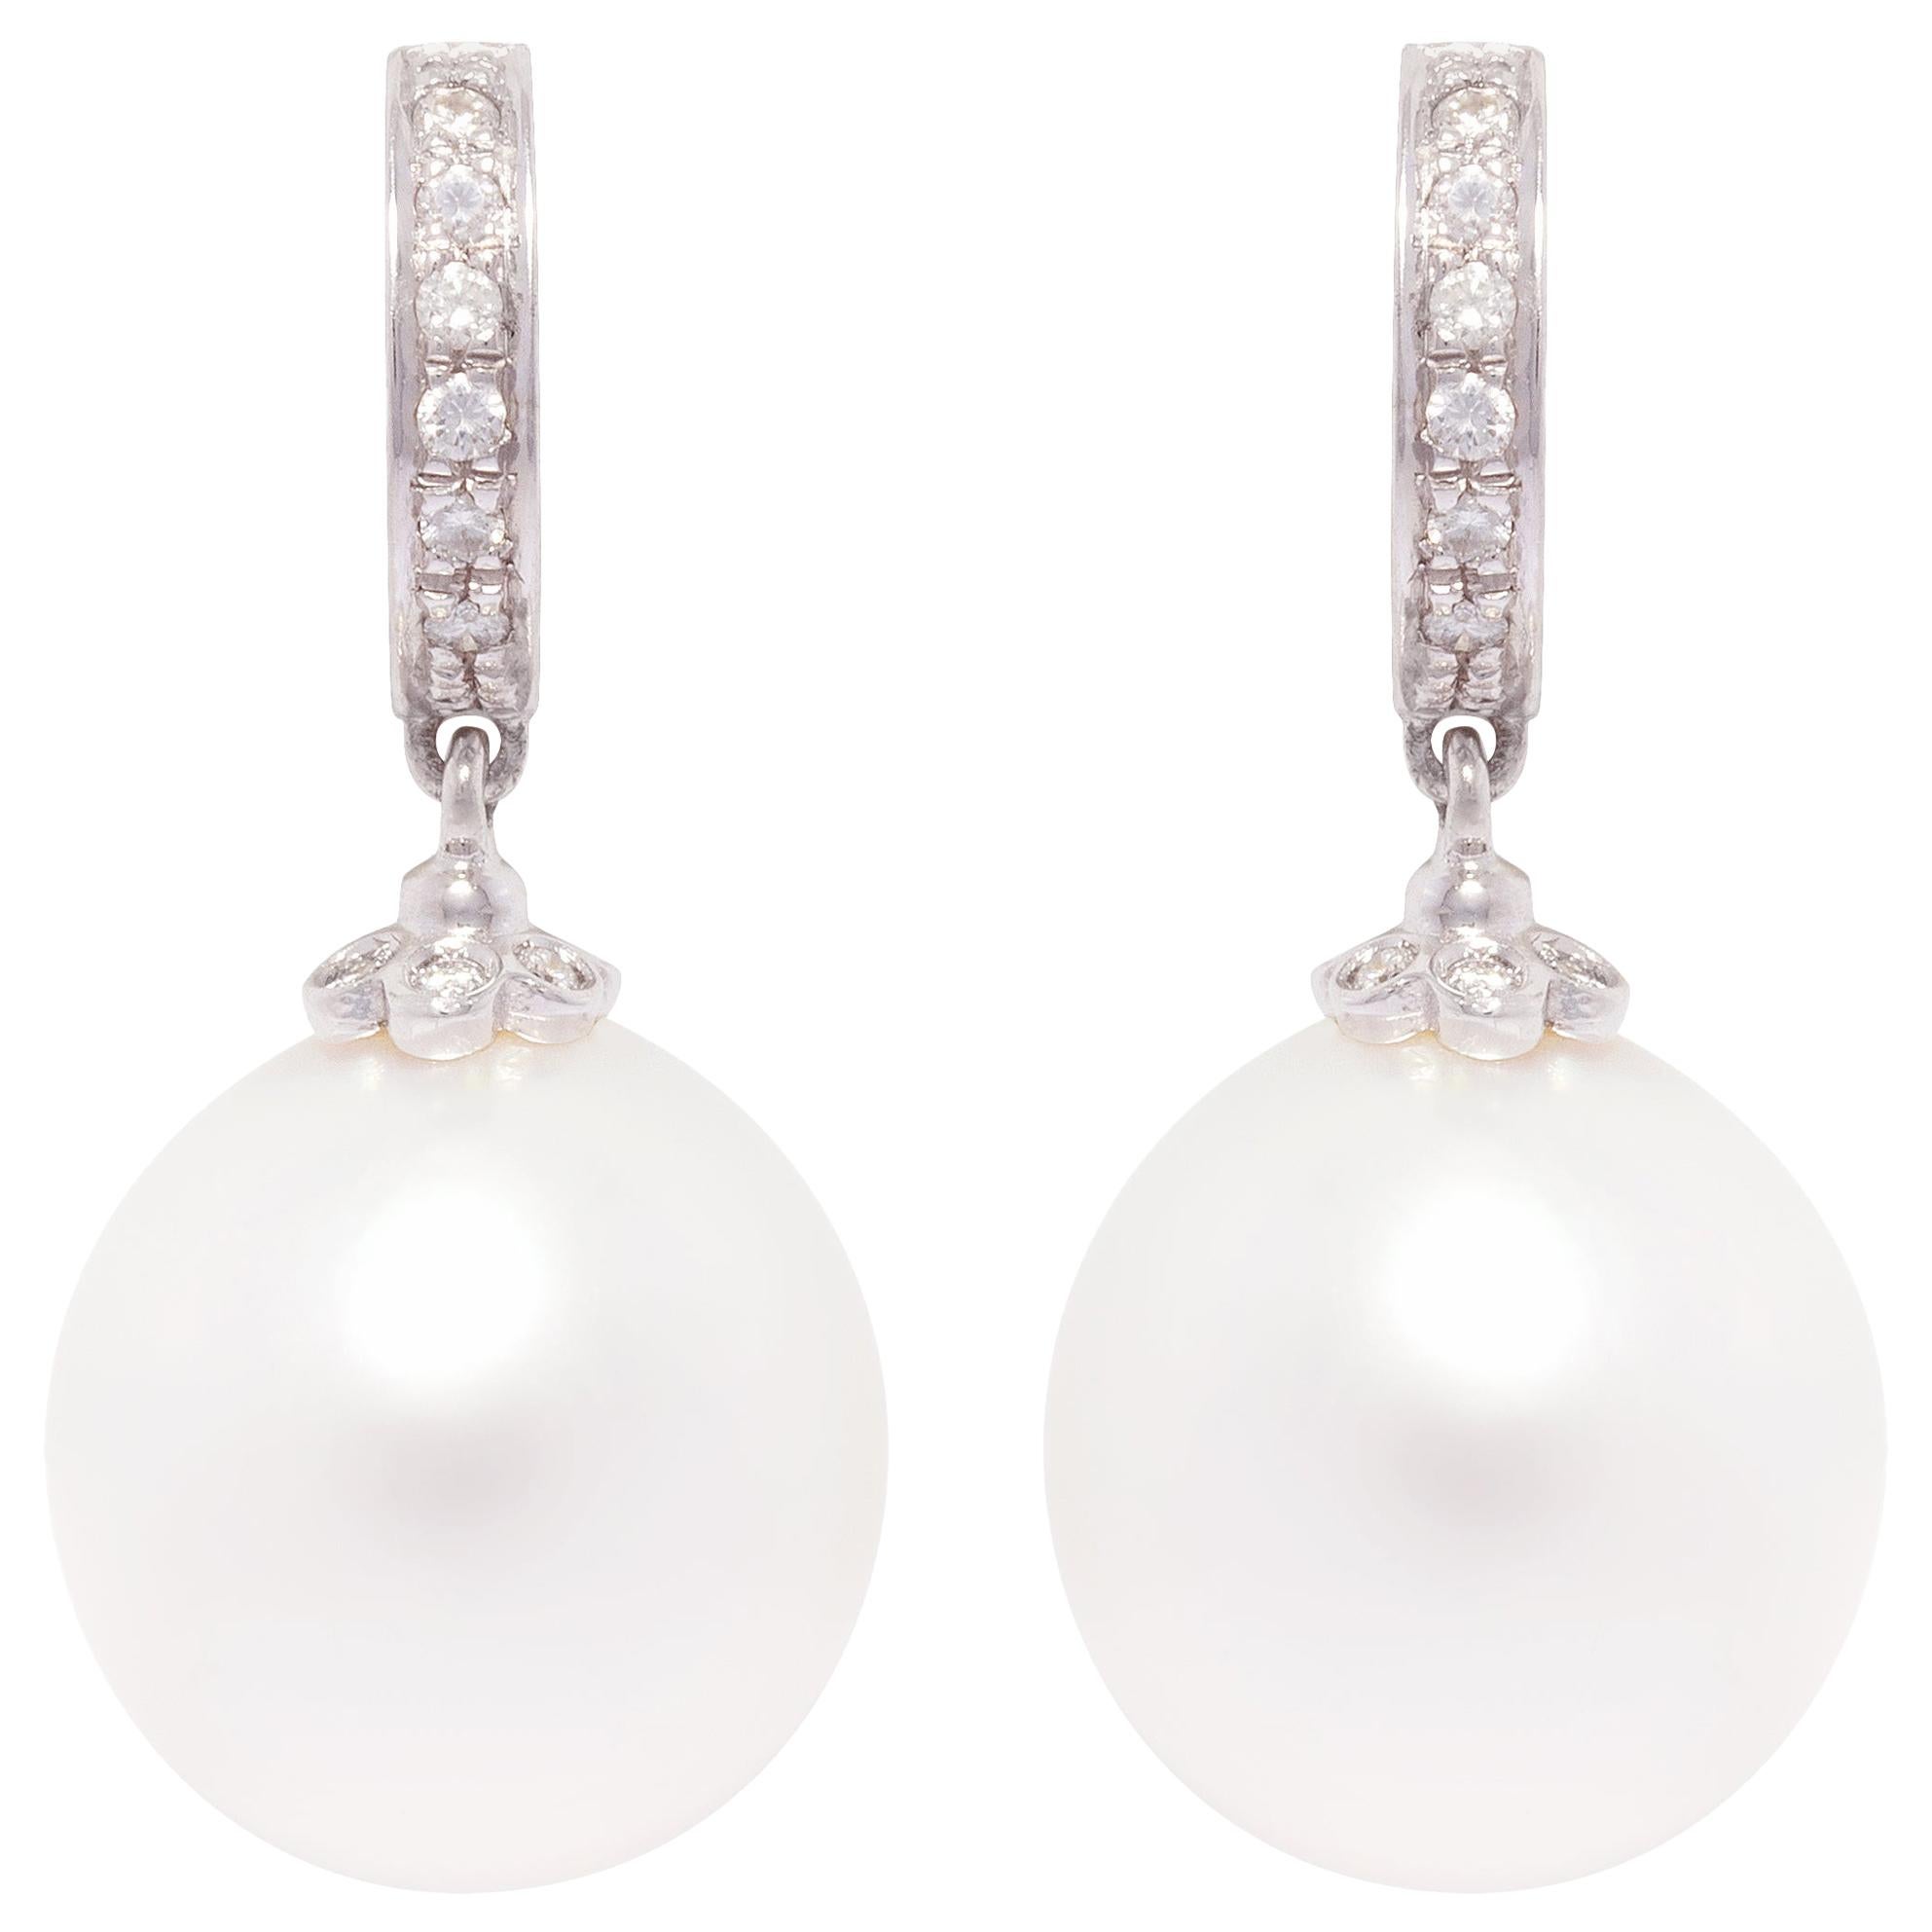 The South Sea pearl and diamond drop earrings feature two 13 x 13.5 mm pearls of fine quality nacre and beautiful lustre.
The pearls are suspended from 2 hoops set with round diamonds of top quality (color, clarity and cut). The total weight of